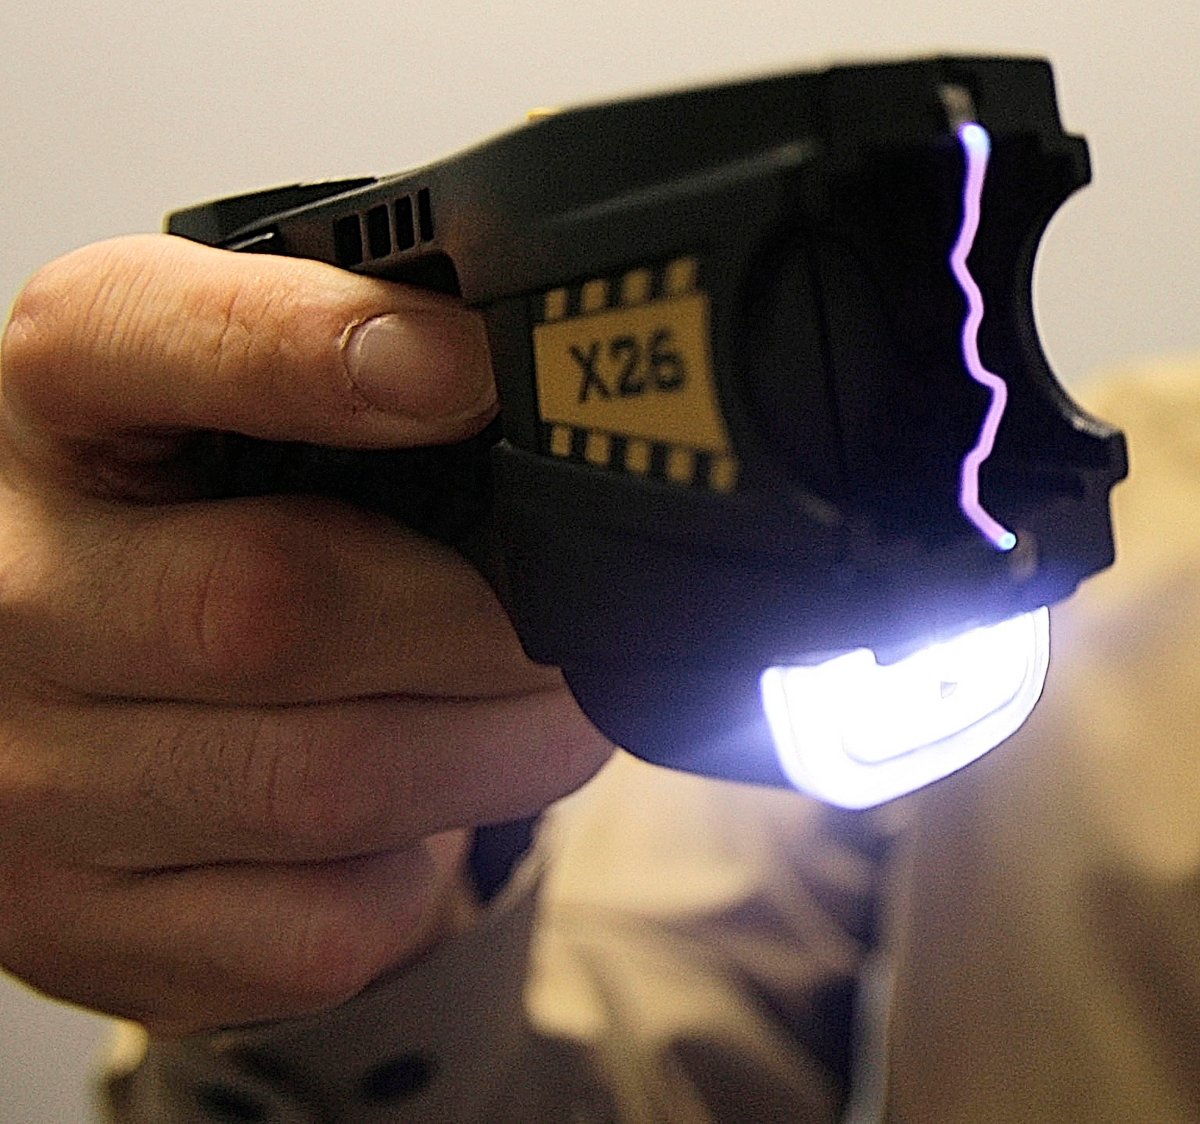 Police in Port Hope, ONt., used a stun gun to assist in the arrest of a man on Oct. 2.